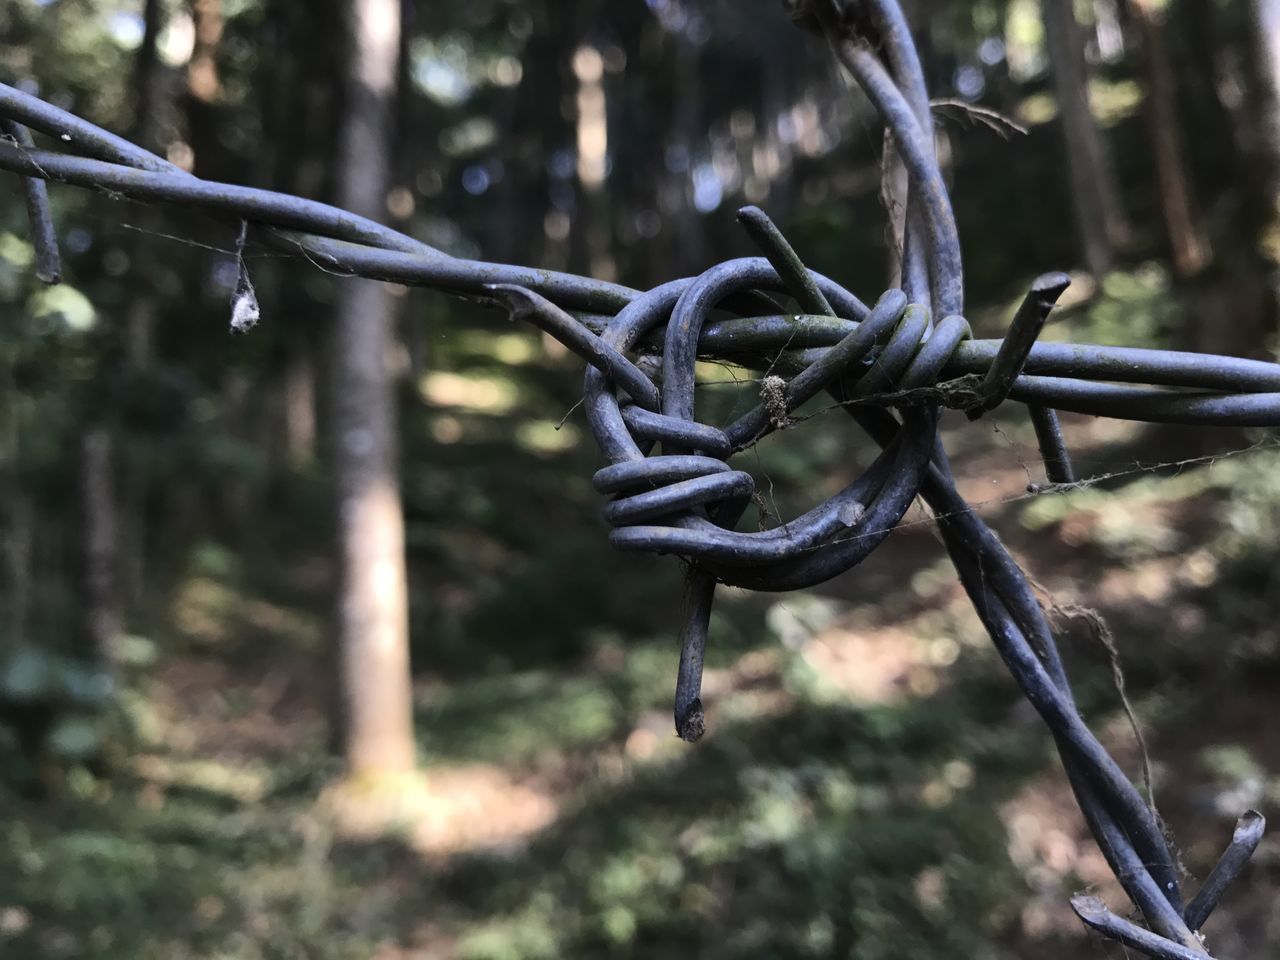 CLOSE-UP OF BARBED WIRE HANGING ON METAL